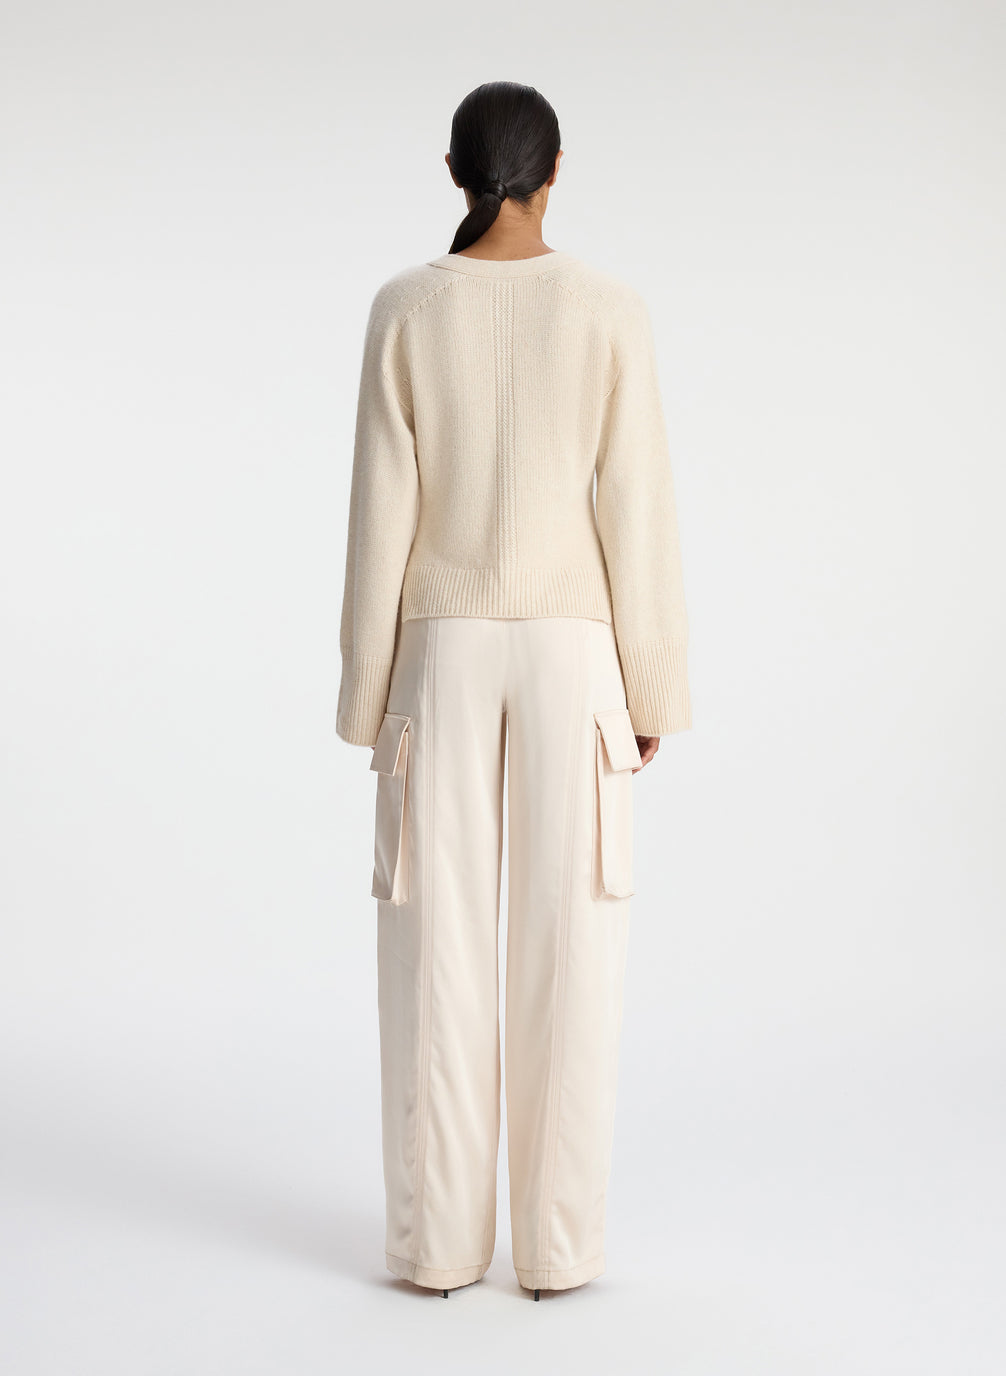 back view of woman wearing cream cardigan and off white satin cargo pants